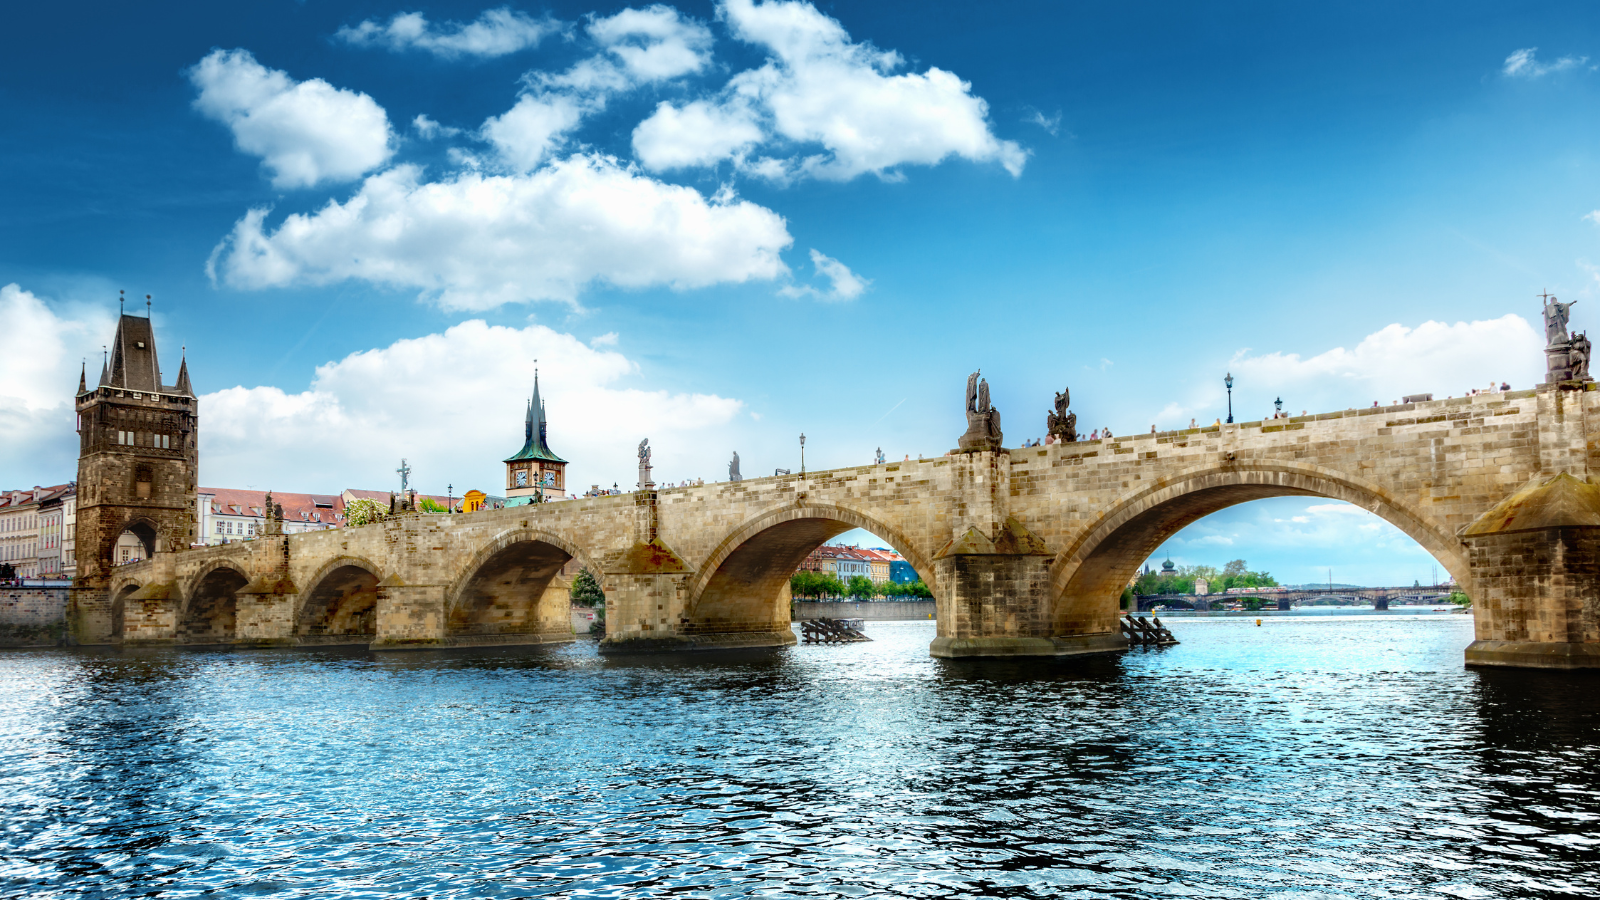 Second option in the list of 10 options to see in Prague in 1 day - Charles Bridge (Karlův most)